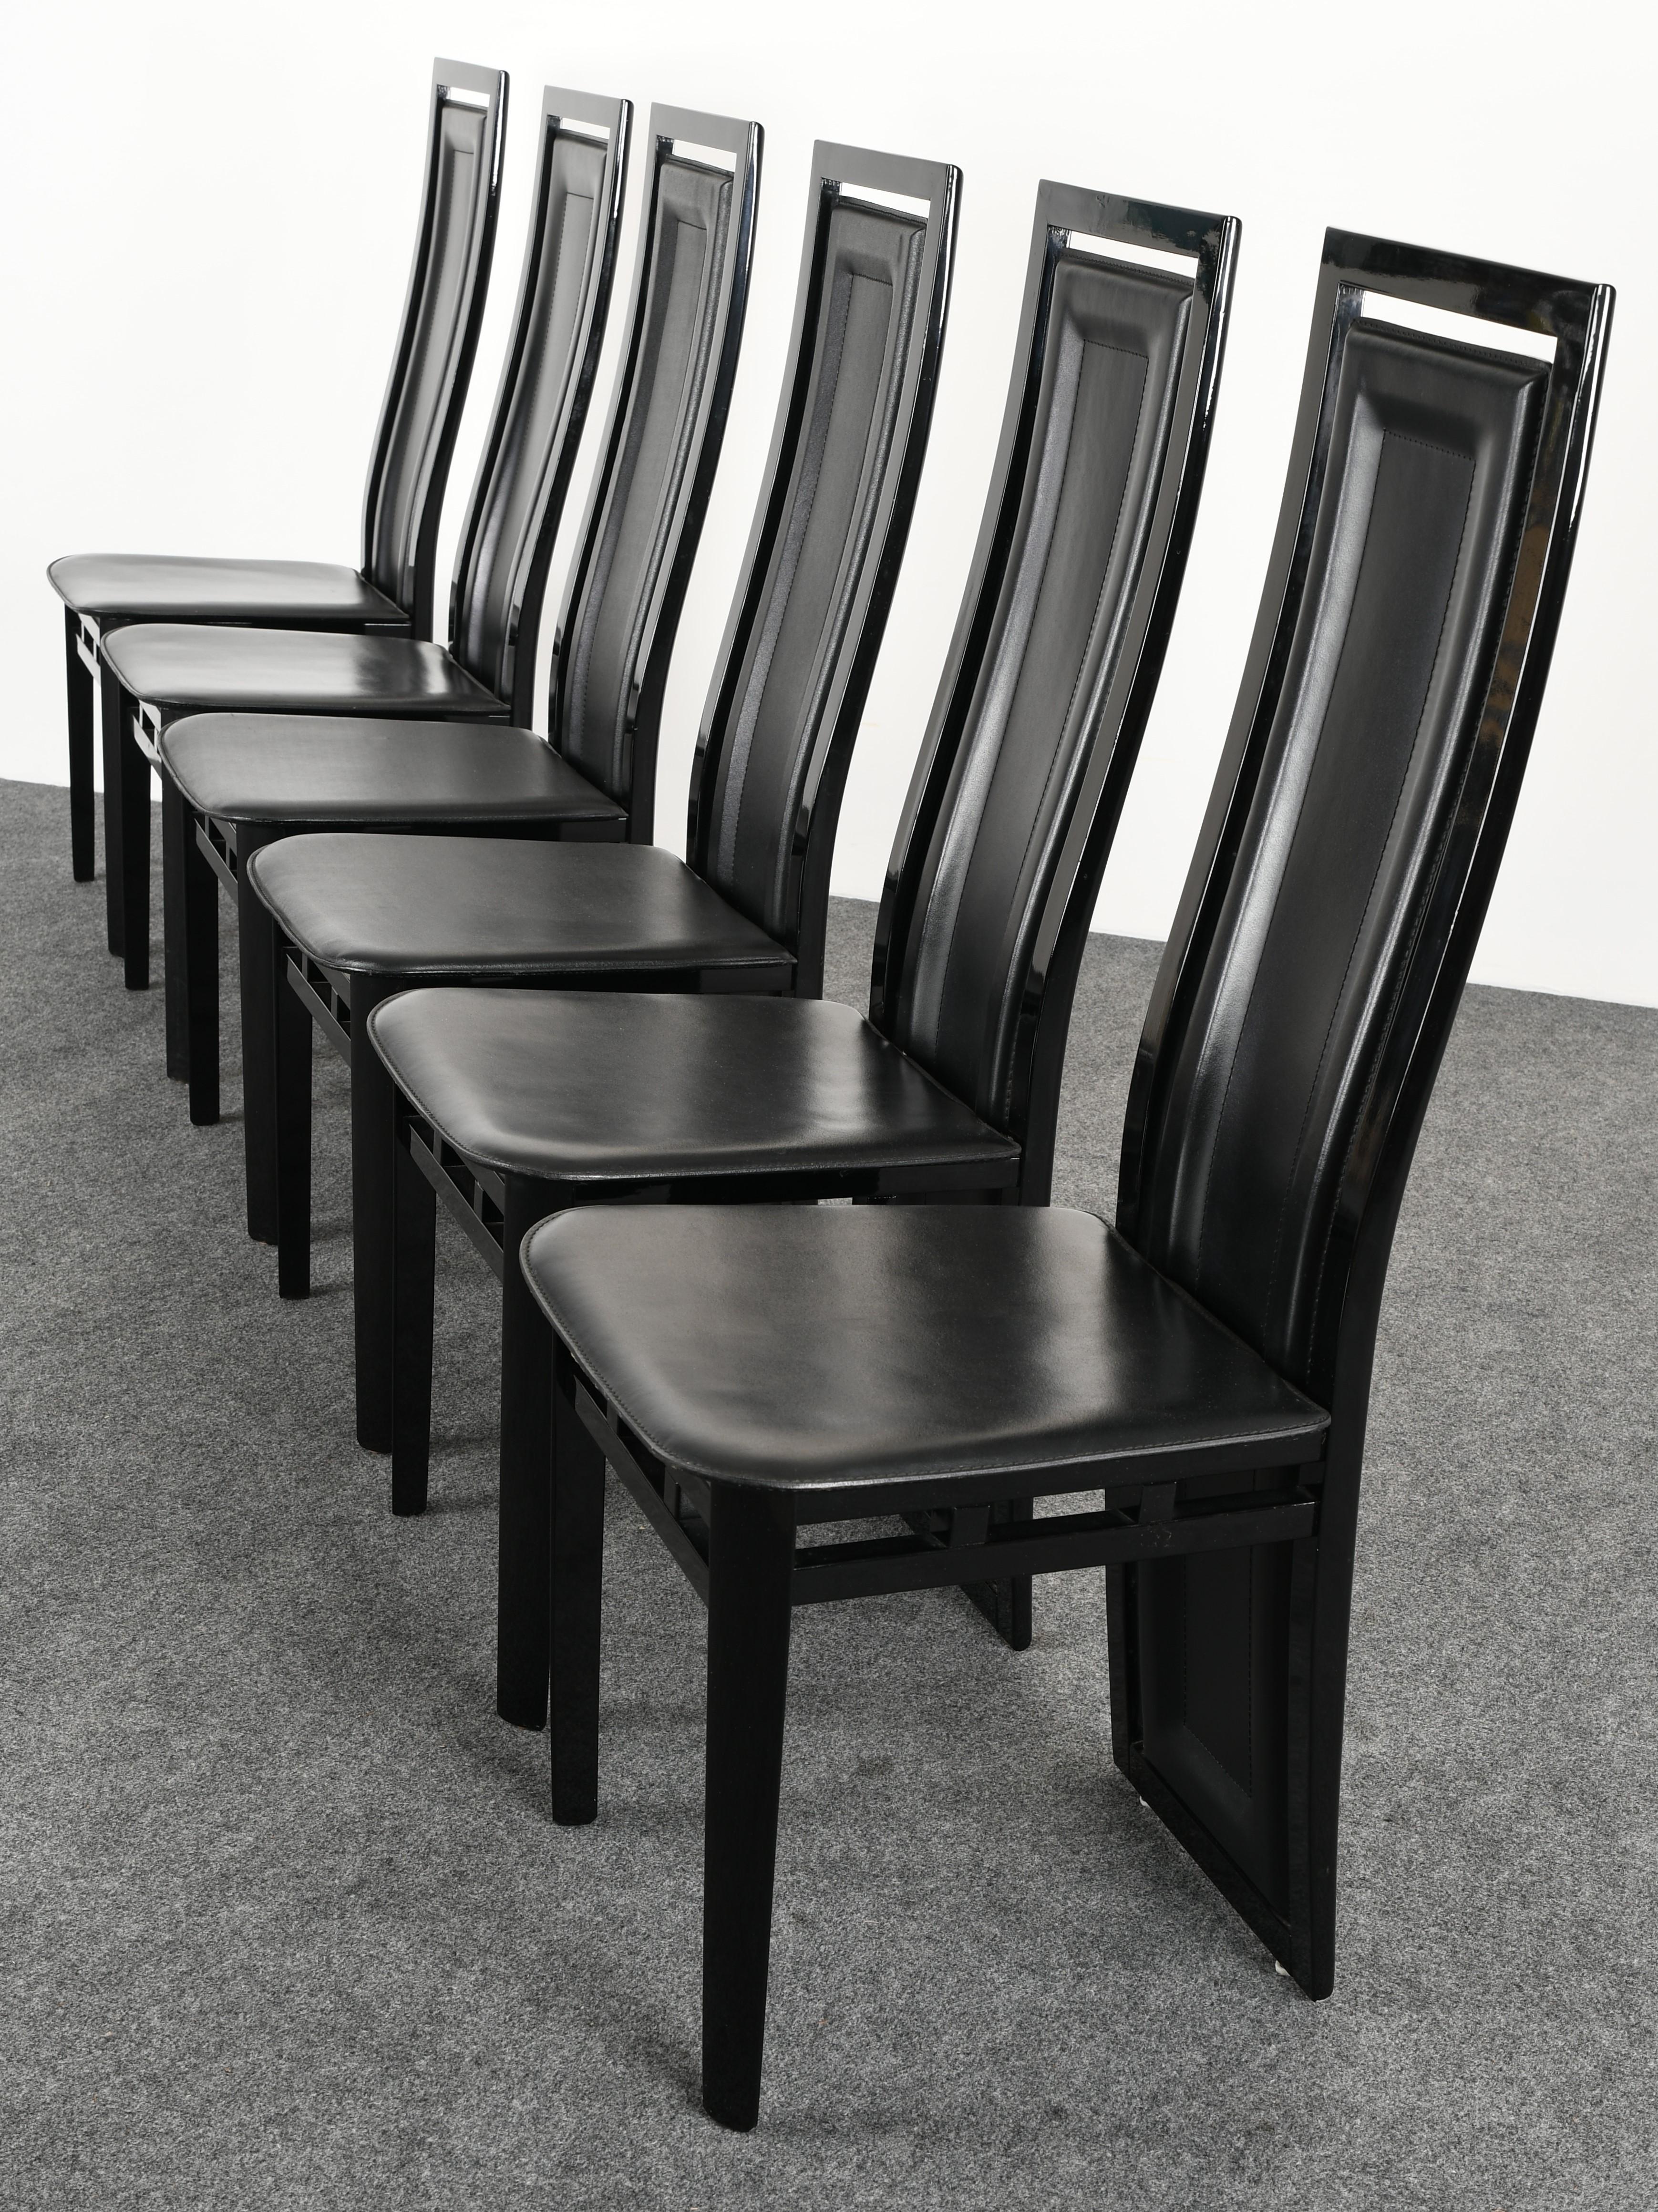 A set of six Postmodern contemporary style Italian Sibau dining chairs made of ebony lacquered wood and black leather seats.

Dimensions: 43.25